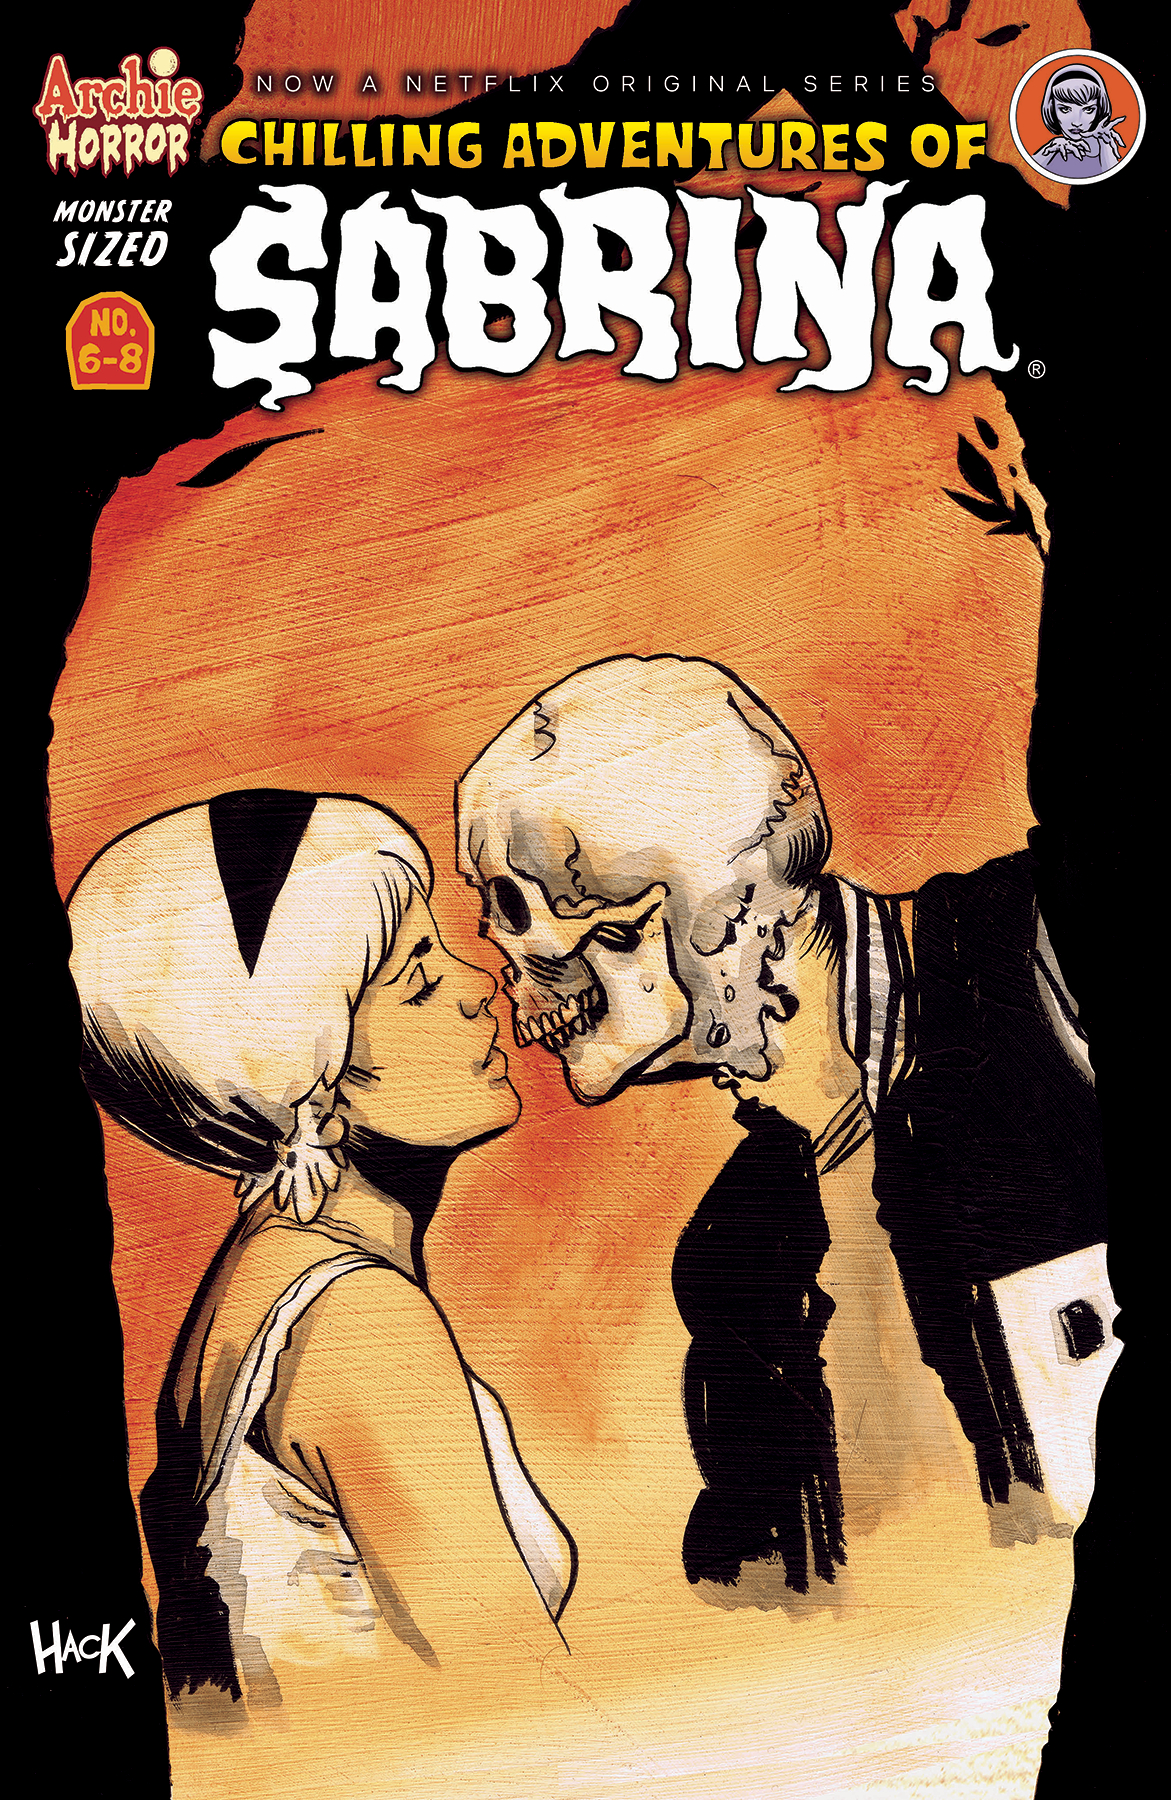 MONSTER SIZED CHILLING ADVENTURES OF SABRINA #1 (MR)